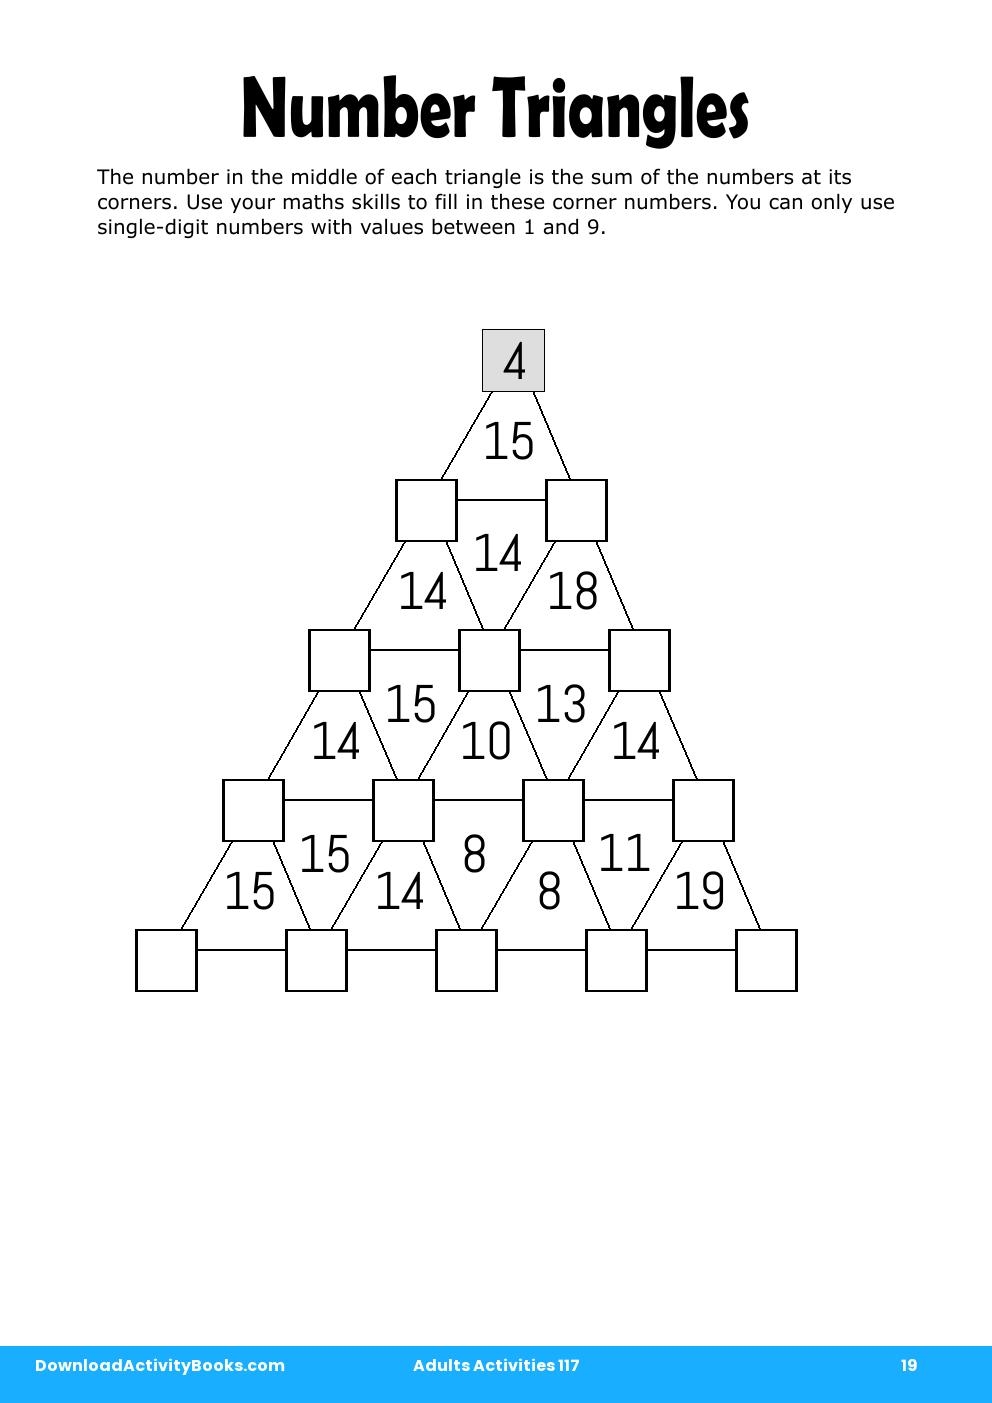 Number Triangles in Adults Activities 117